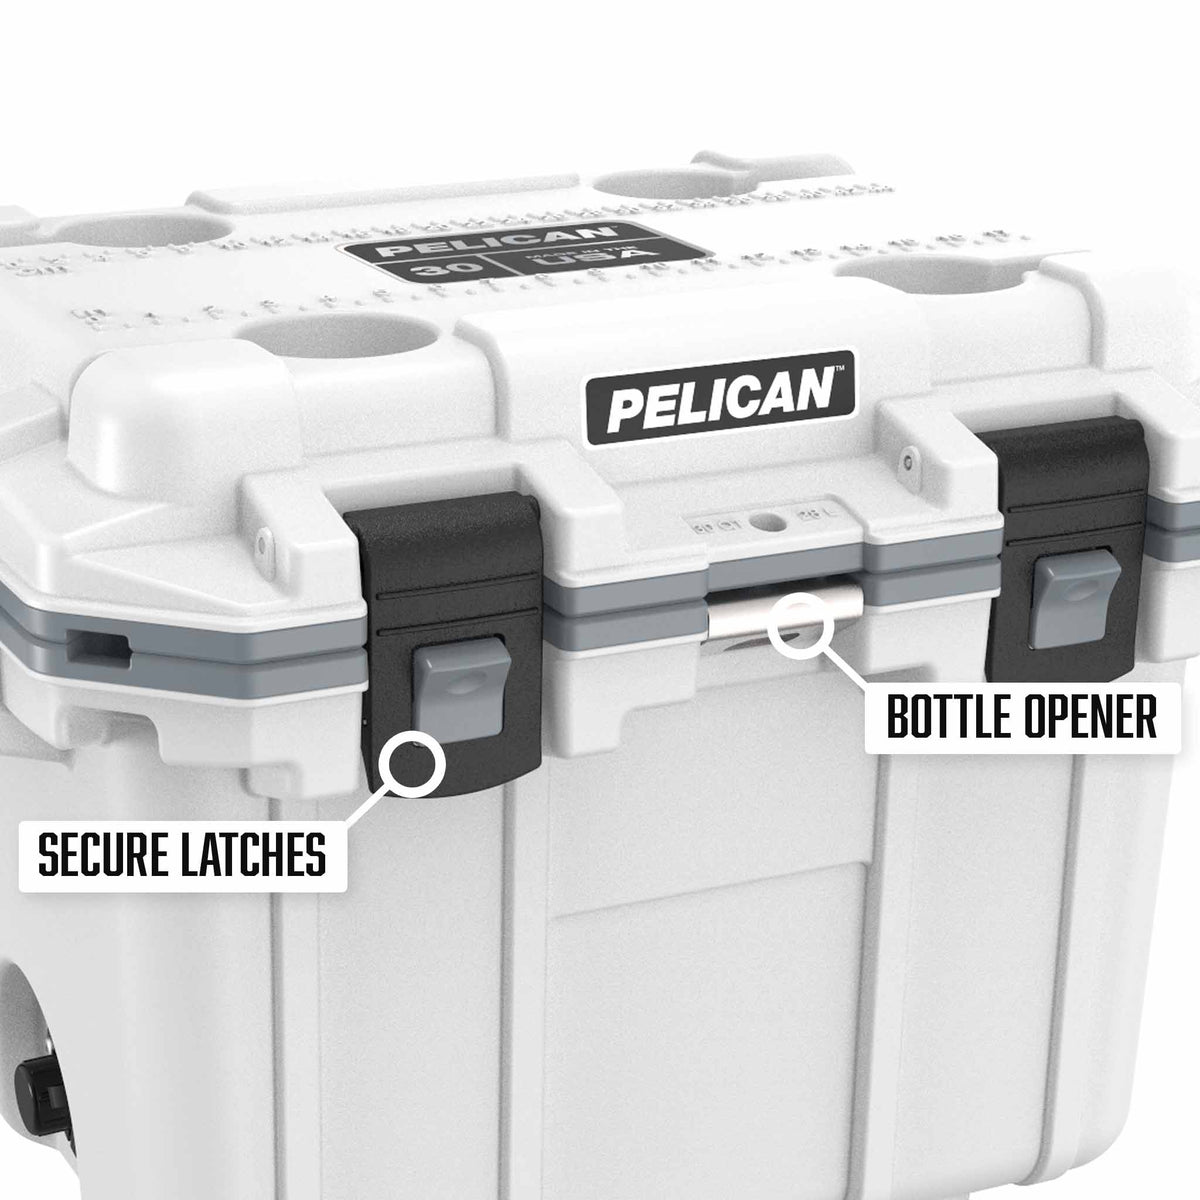 30QT Pelican Elite Cooler has secure press &amp; pull latches and a built in bottle opener